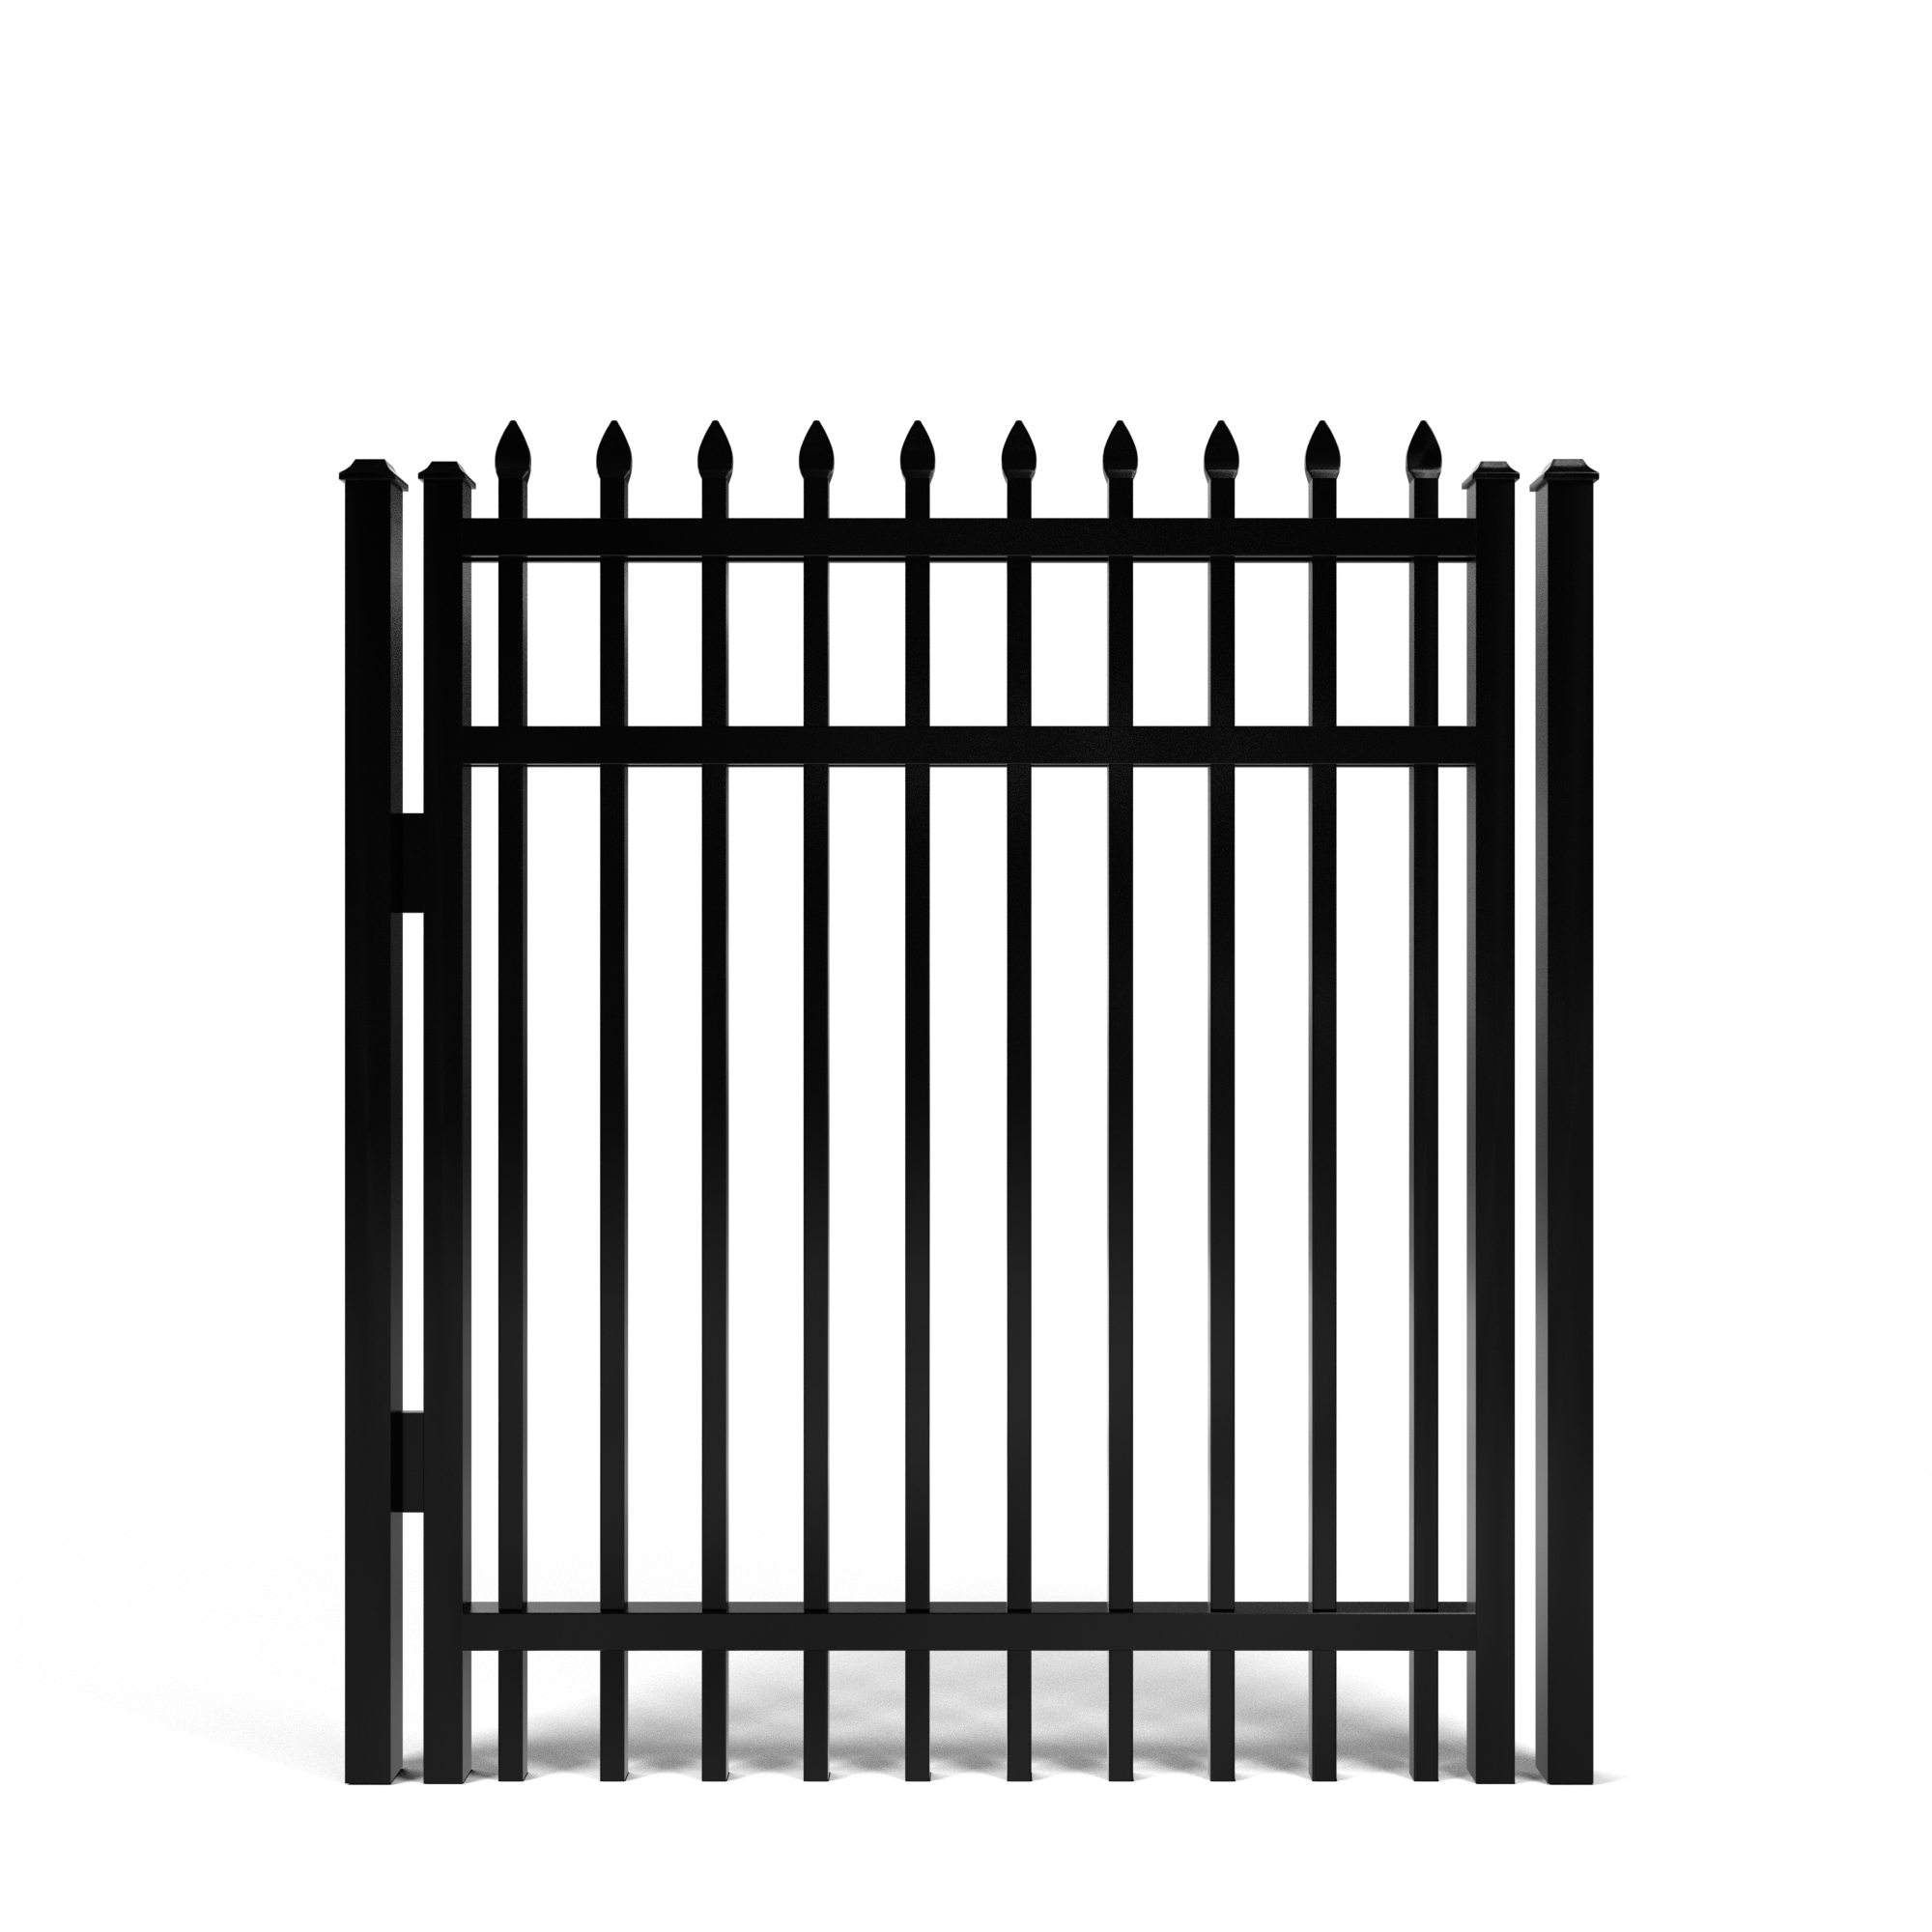 AD Commercial Series grade Aluminum Fence with High Quality